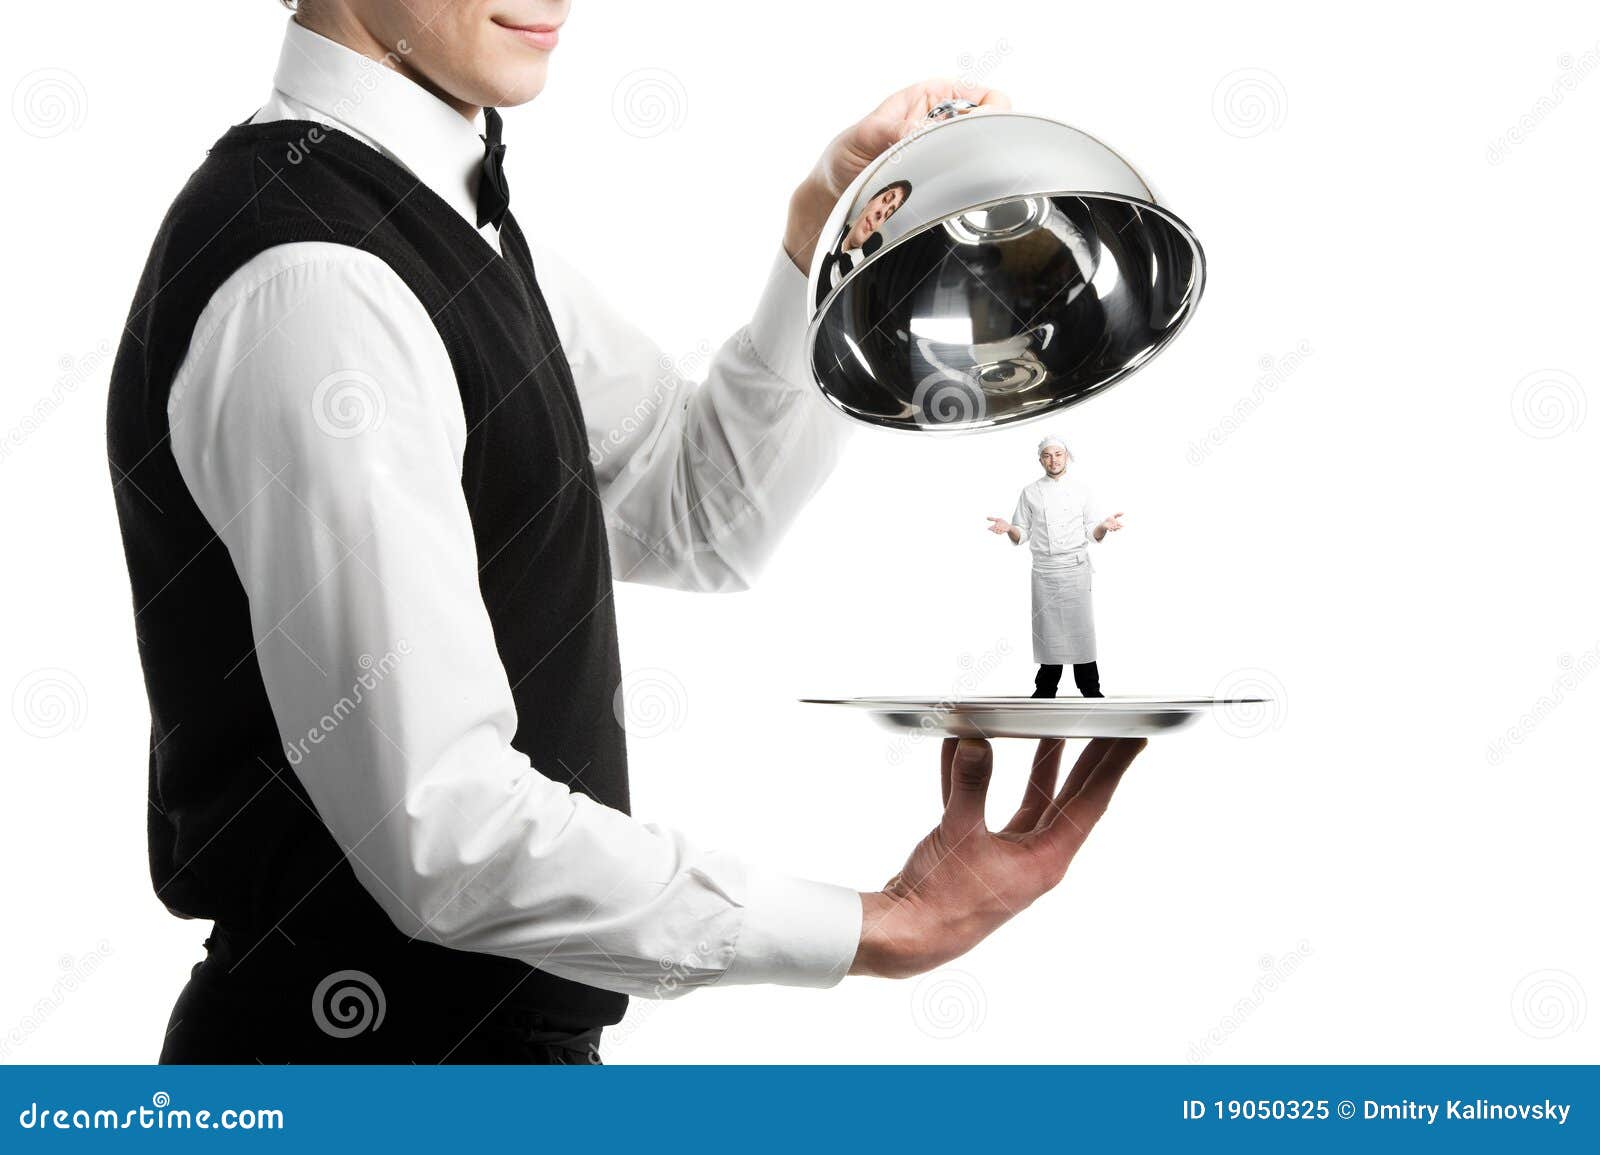 hands of waiter with cloche